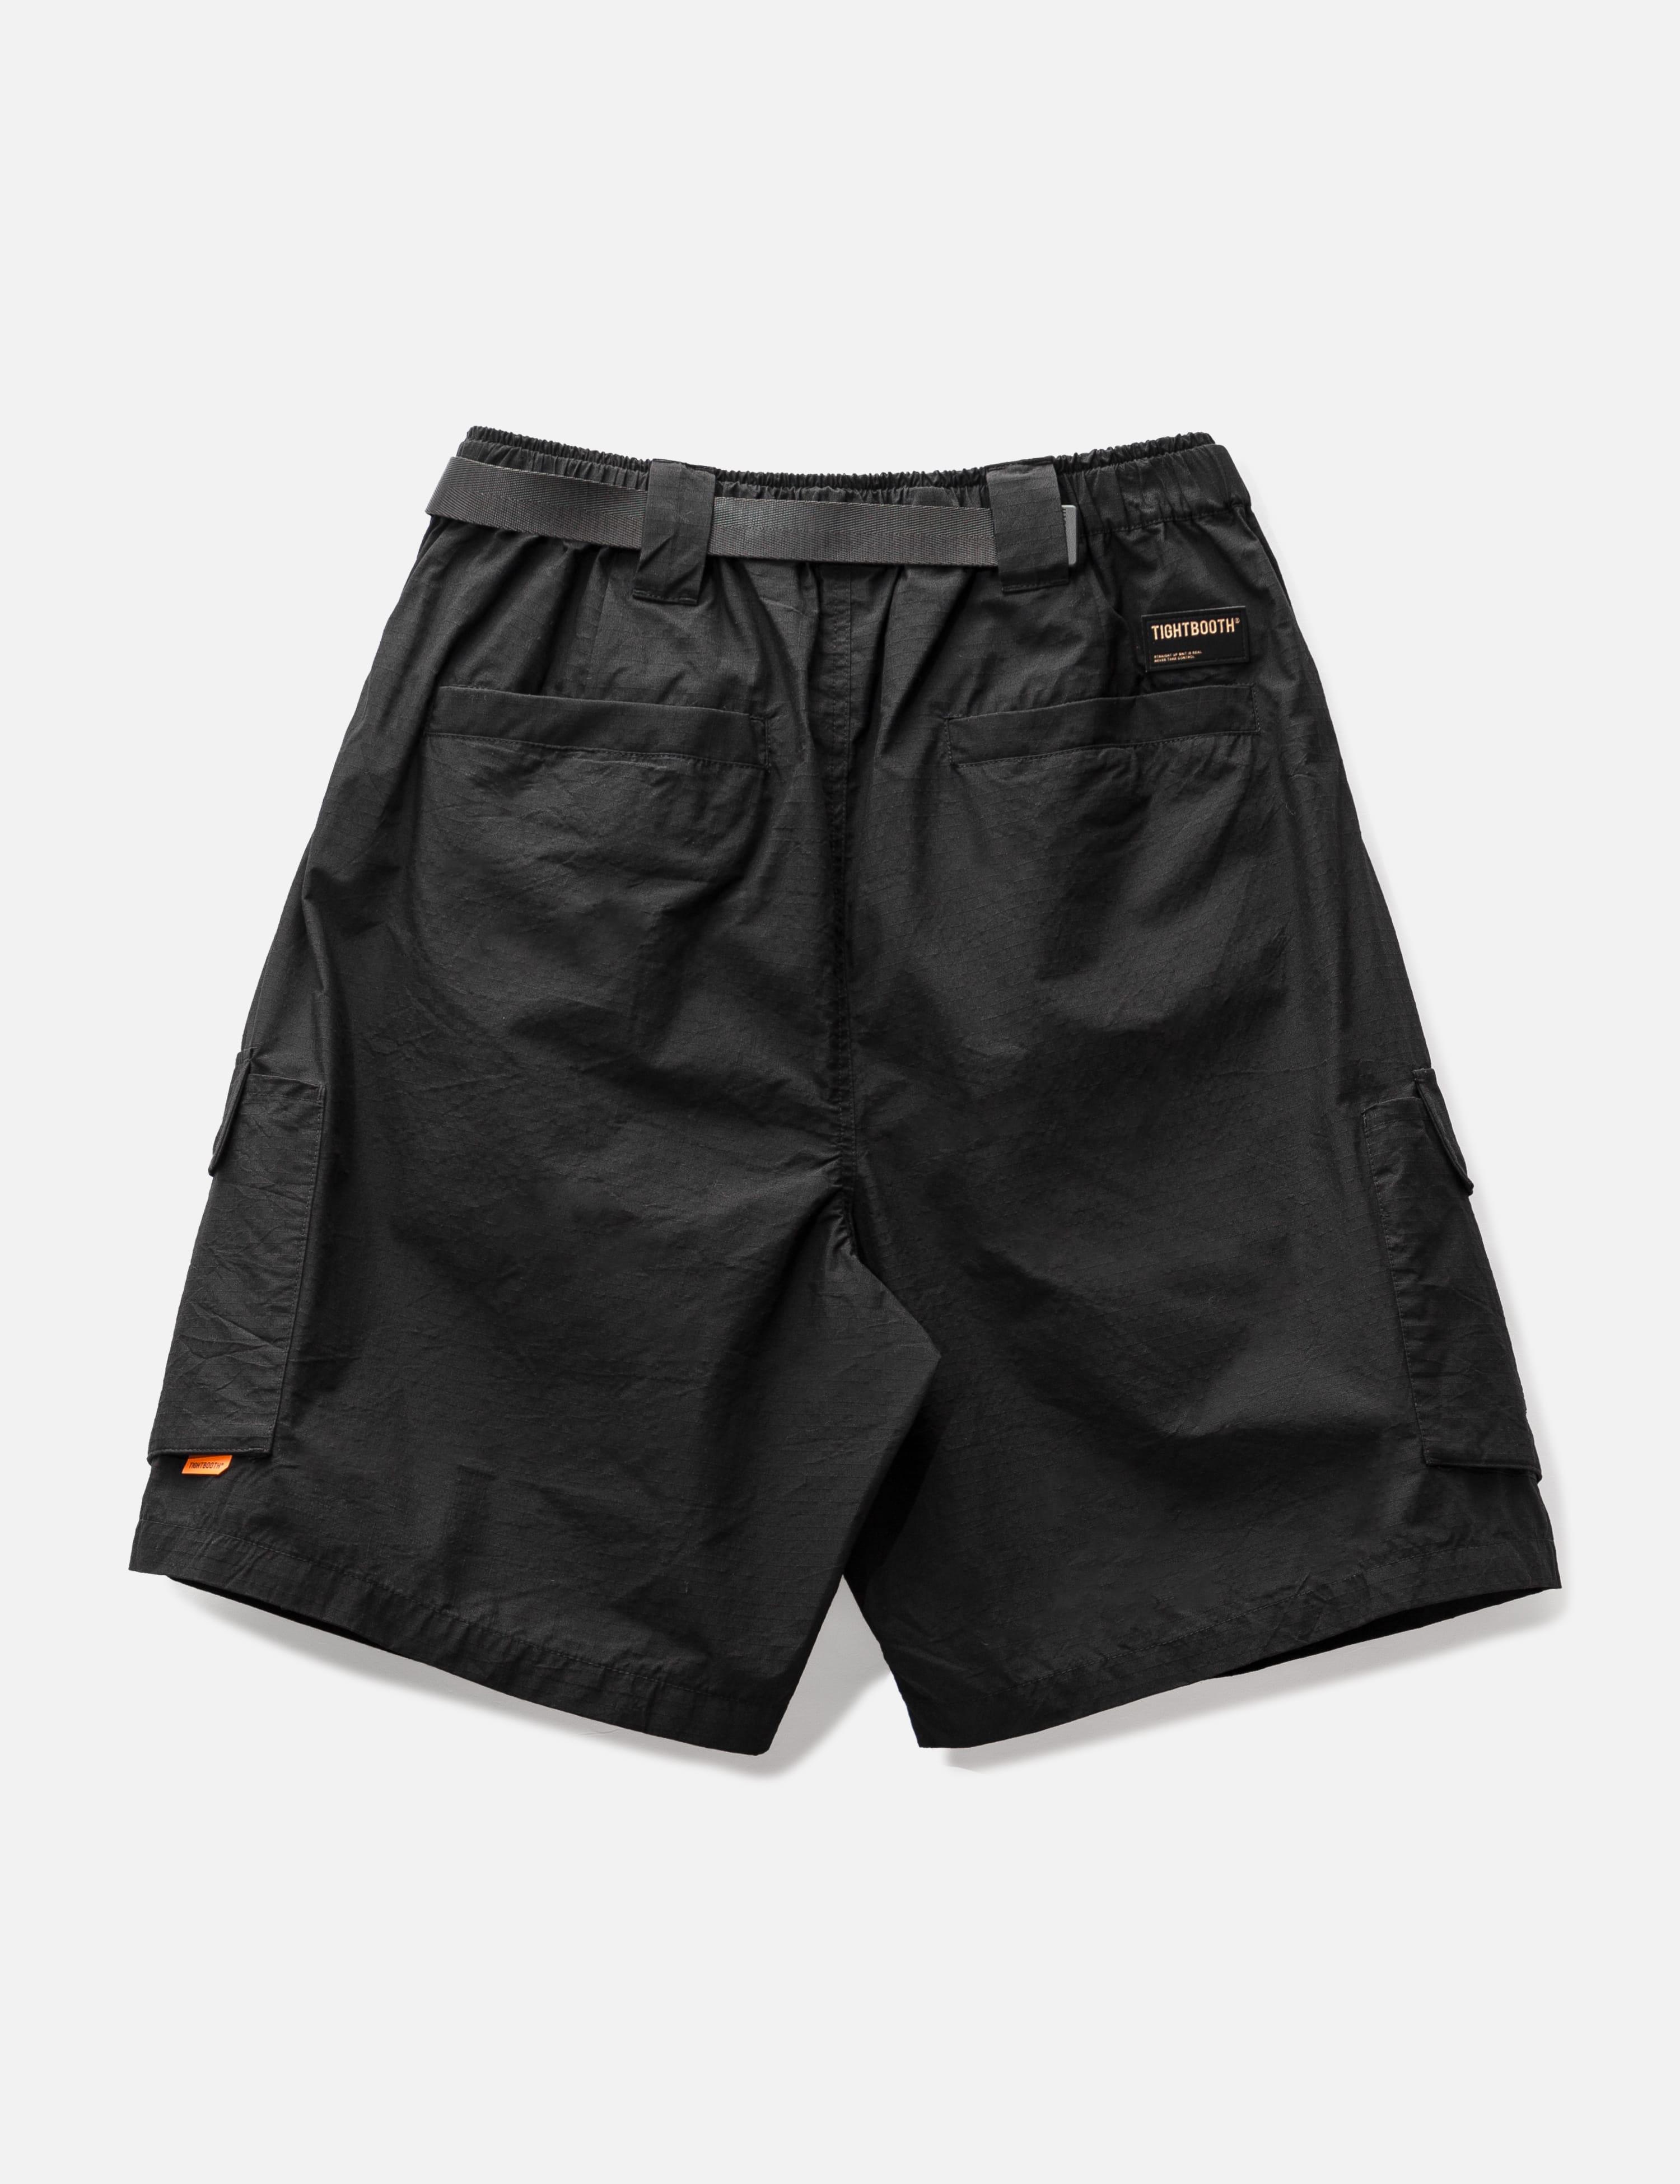 Tightbooth Ripstop Cargo Shorts in Black for Men | Lyst Canada